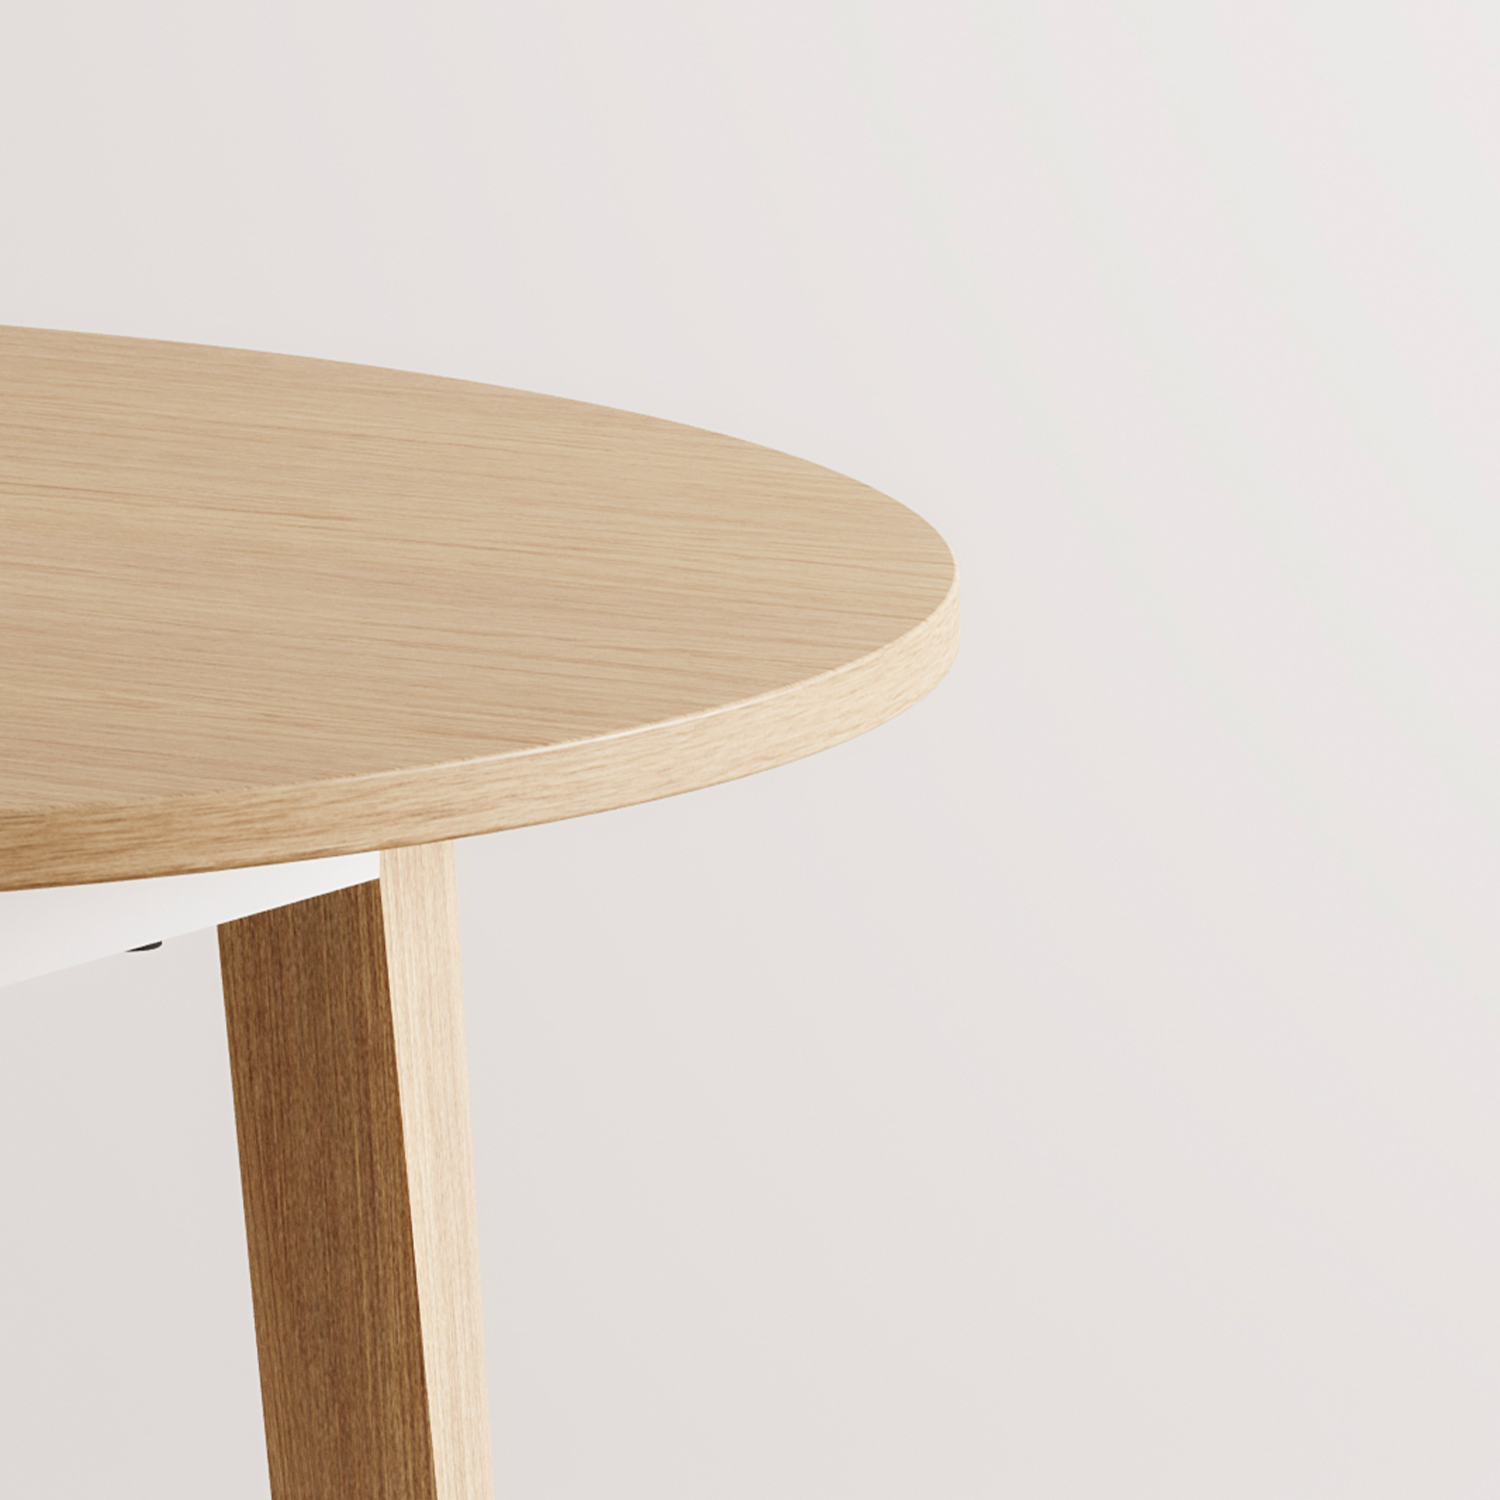 NEW MODERN full wood round table